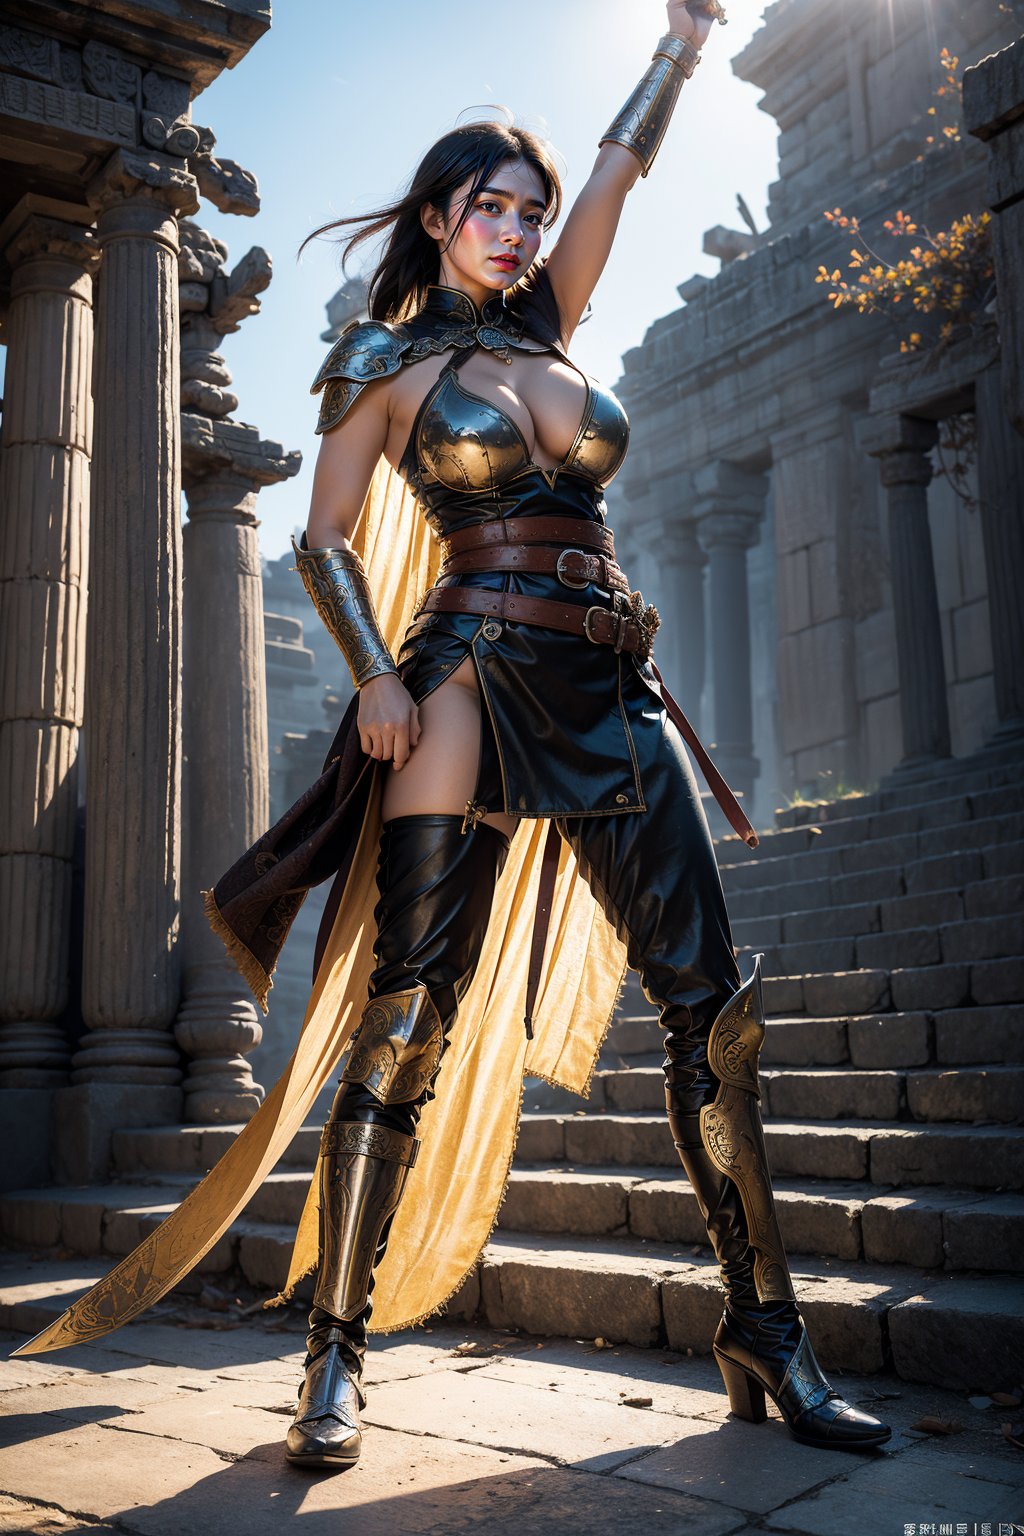 A heroic figure stands proudly before ancient temple ruins, her worn leather armor and intricately tied belt whipping wildly as she holds aloft a gleaming katana, its curved blade reflecting the warm sunlight casting a dramatic shadow on the weathered stone steps.